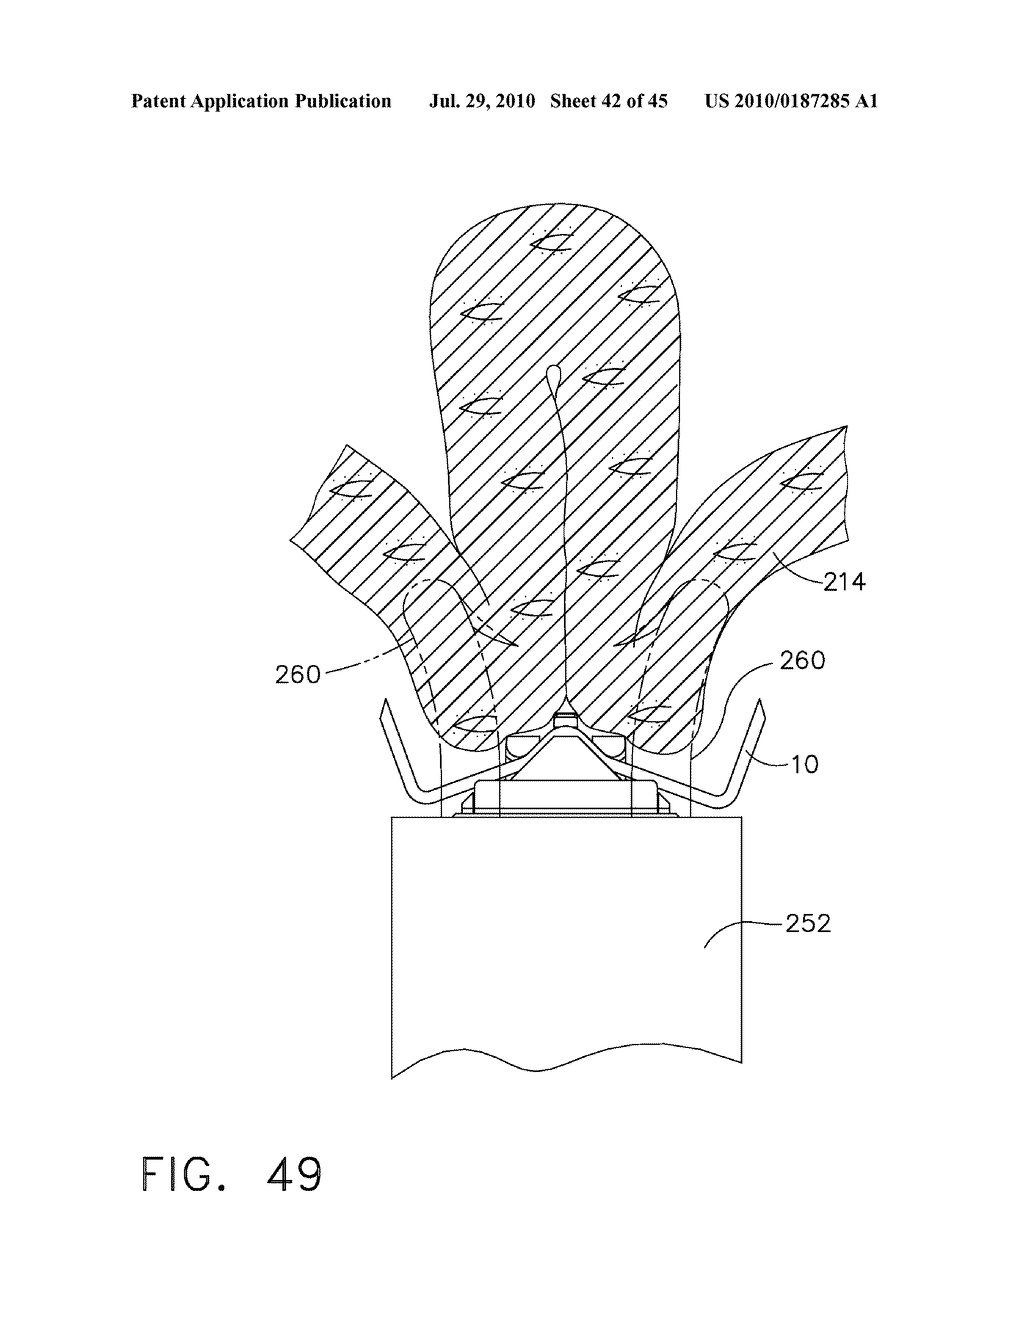 SURGICAL STAPLER FOR APPLYING A LARGE STAPLE THOUGH A SMALL DELIVERY PORT AND A METHOD OF USING THE STAPLER TO SECURE A TISSUE FOLD - diagram, schematic, and image 43